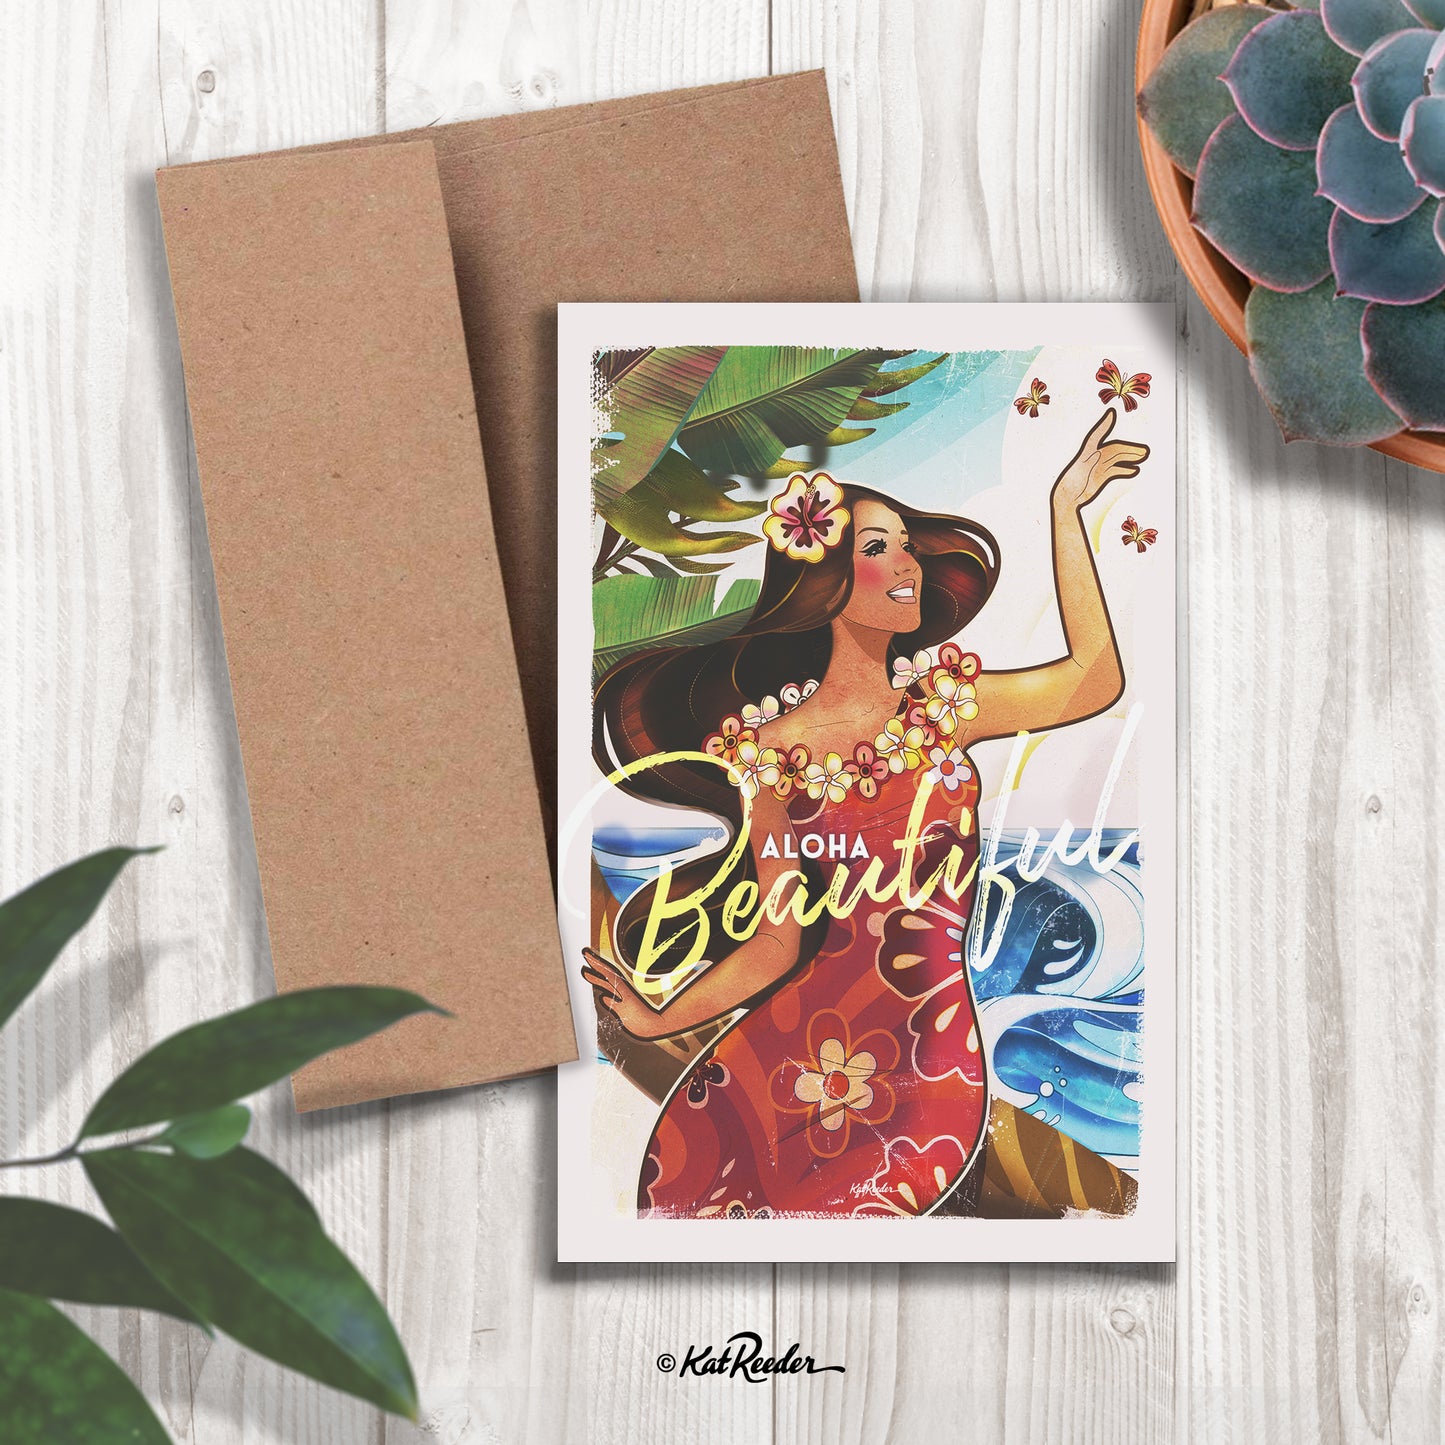 5x7 greeting card featuring an illustration of an island girl holding a butterfly in the style of vintage travel posters. The message on the front of the card reads “Aloha Beautiful". A kraft paper envelope is included with card. 